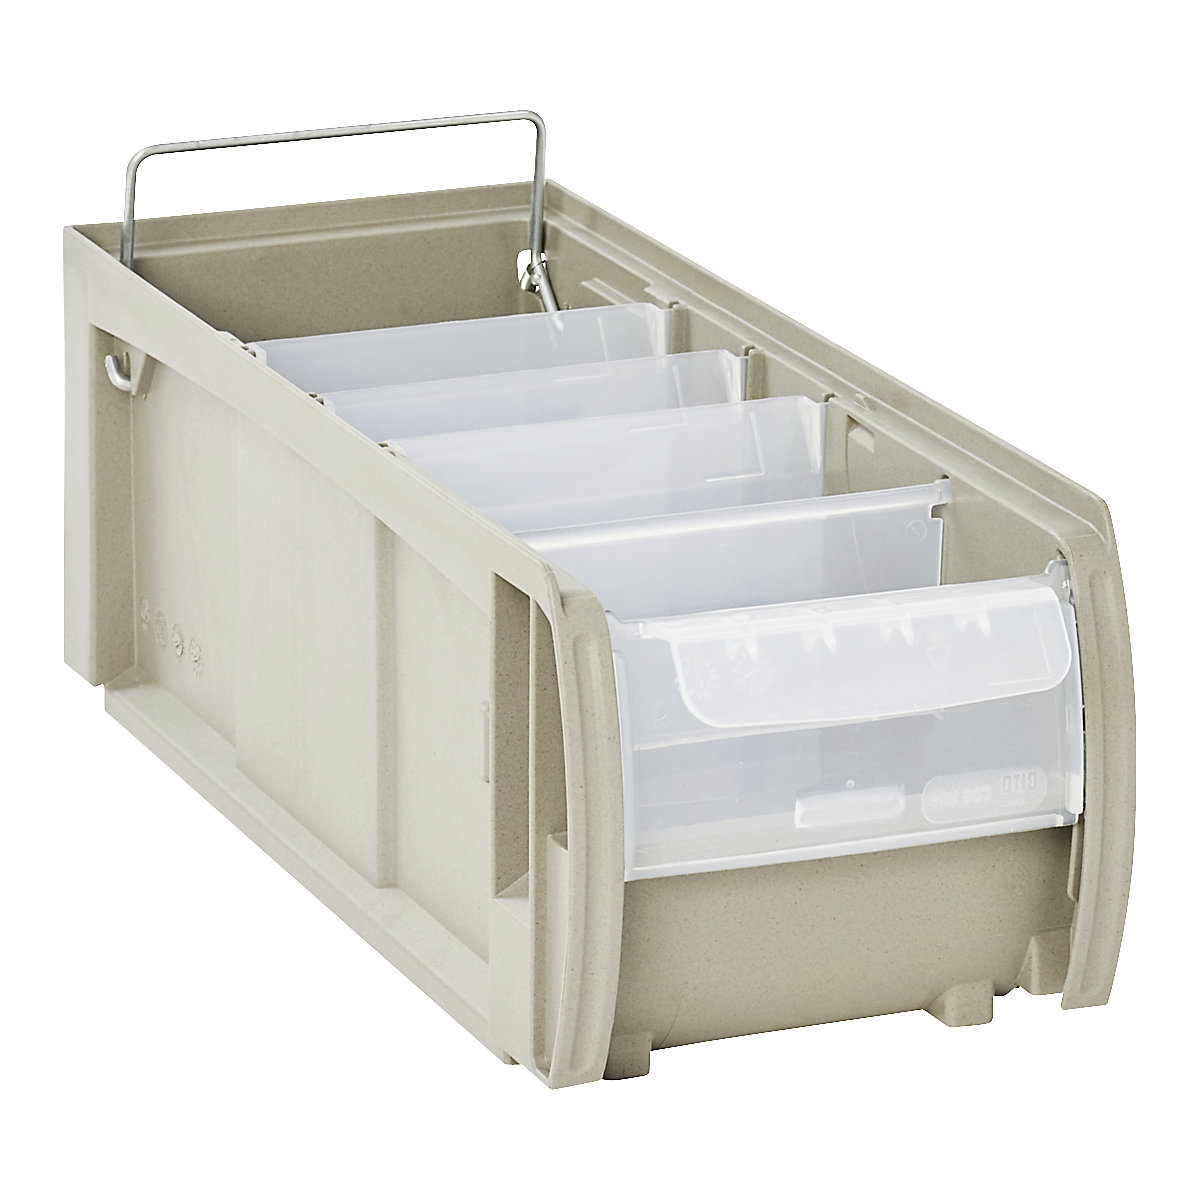 Sunflower C-parts container open fronted storage bin – BITO, made of SFC, pack of 12, LxWxH 400 x 156 x 140 mm-2